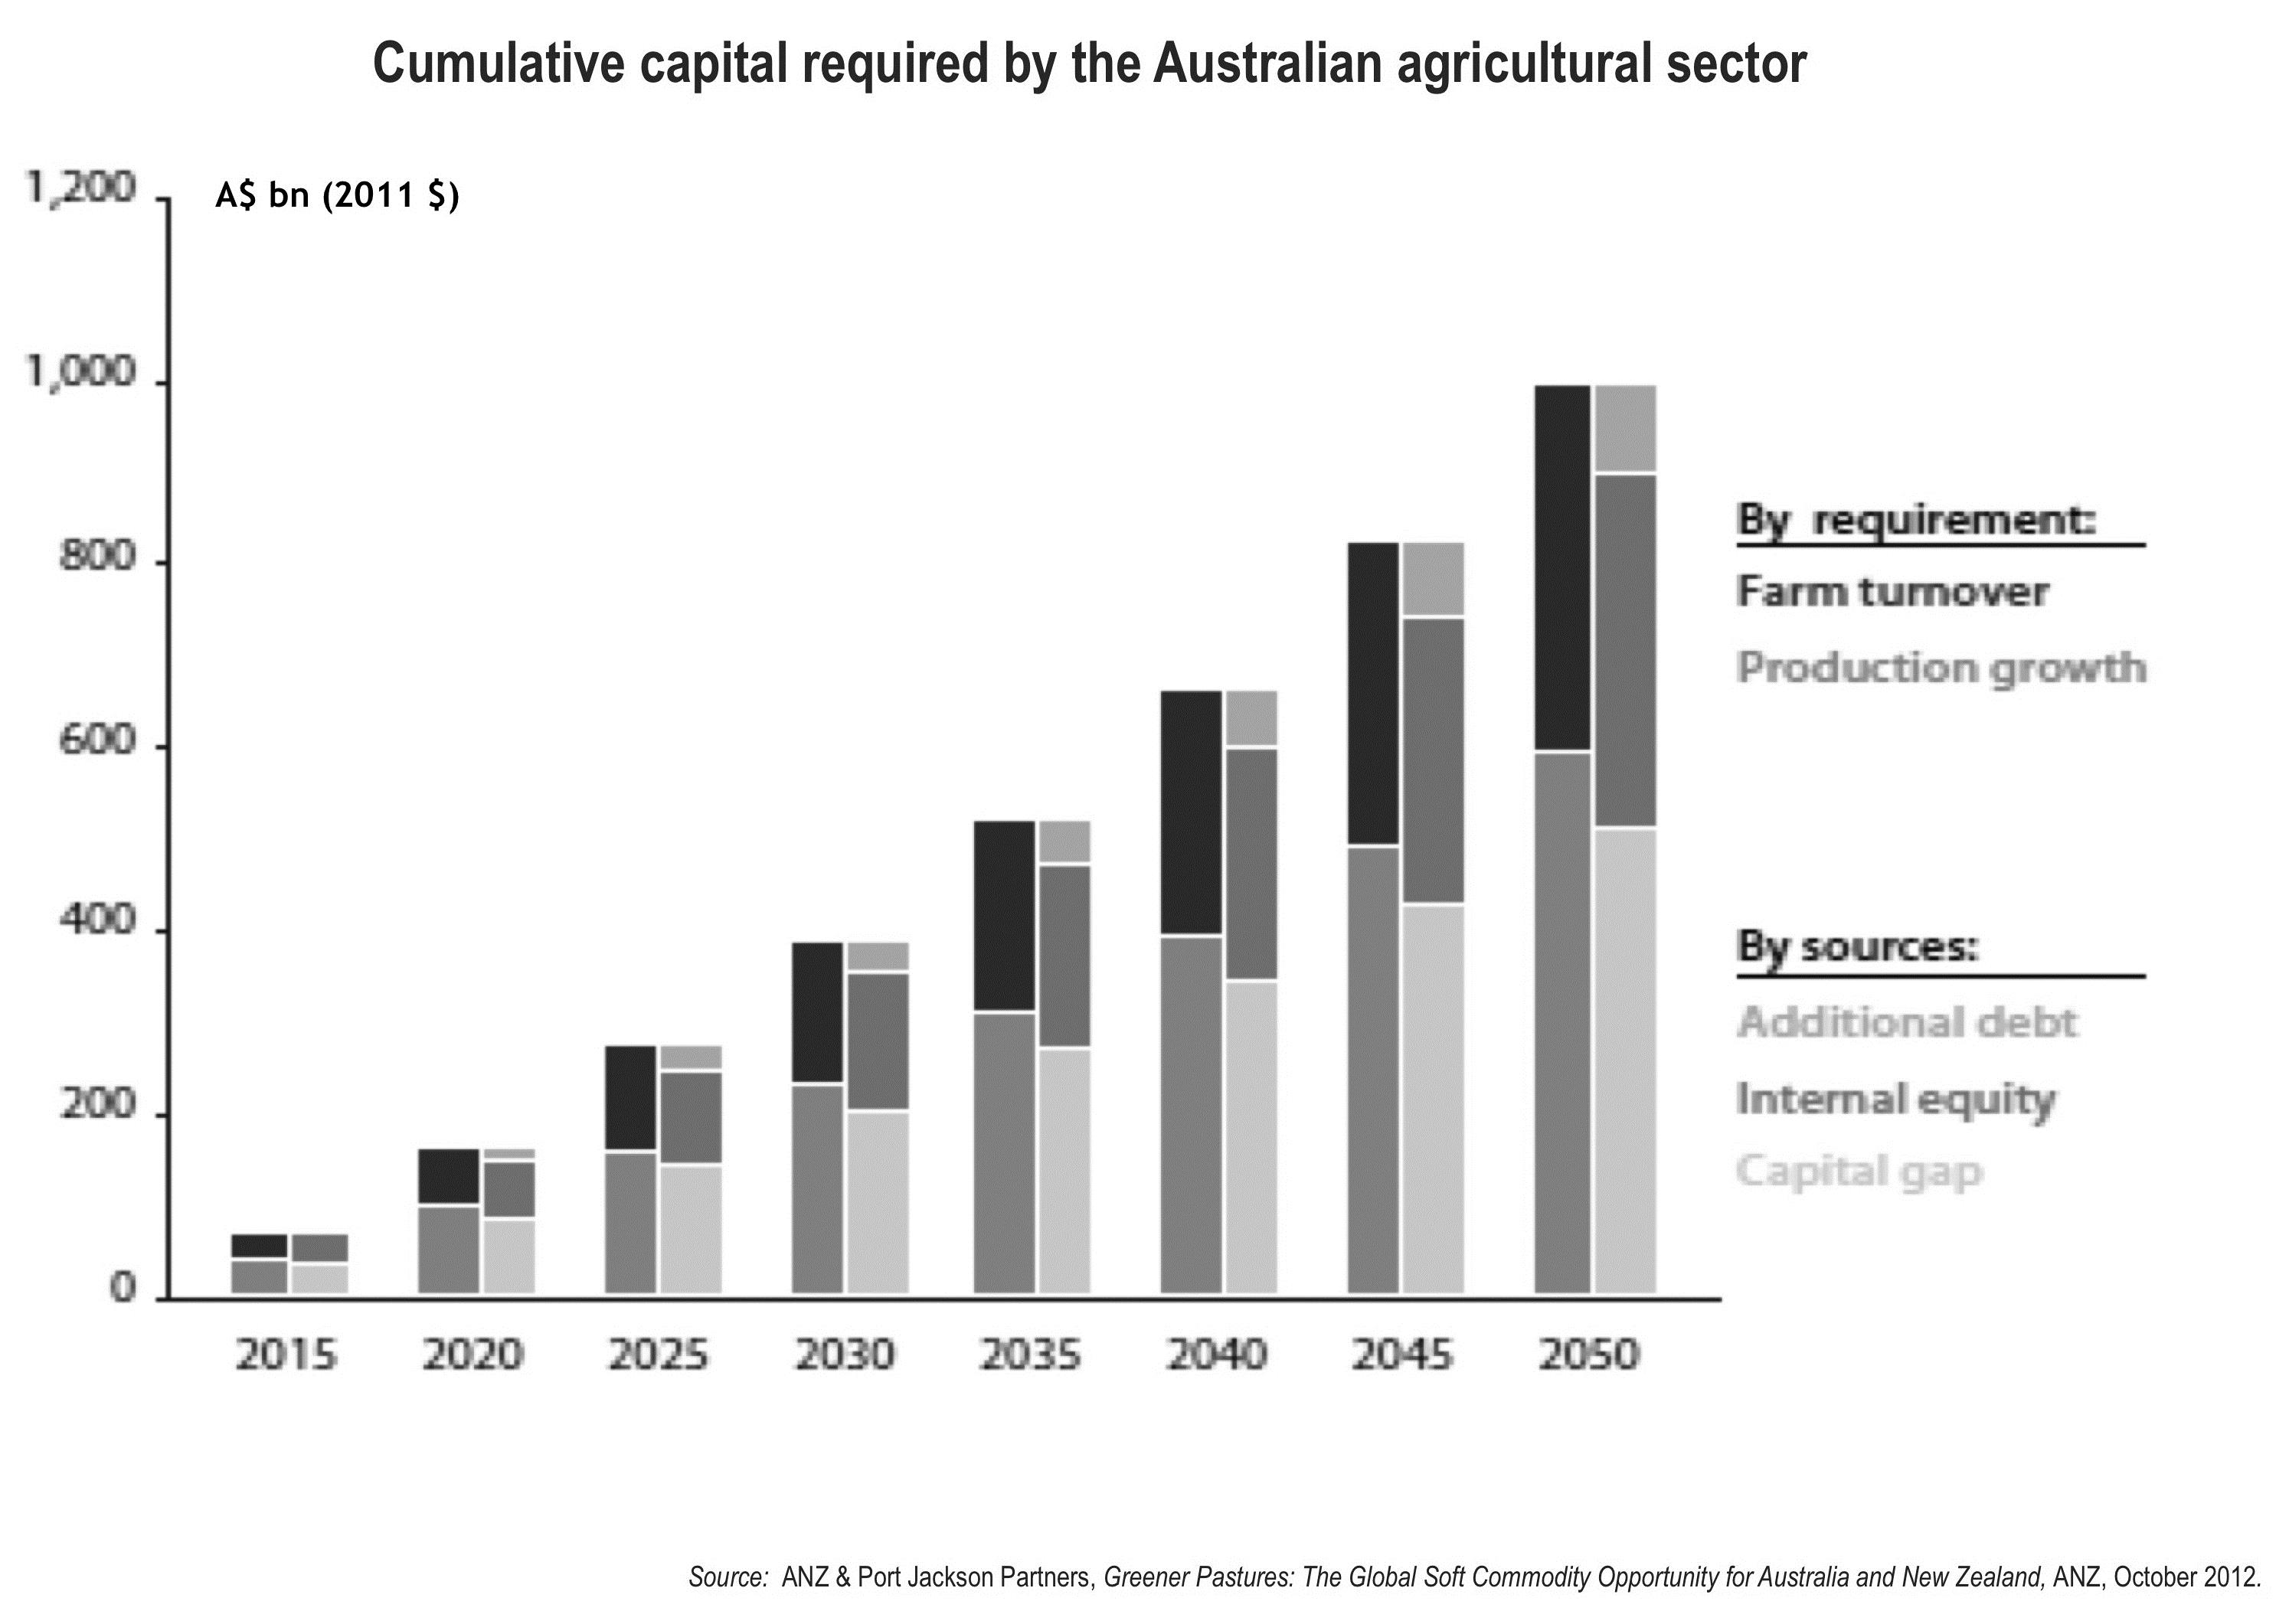 Figure 32: Cumulative capital required by the Australian agricultural sector.